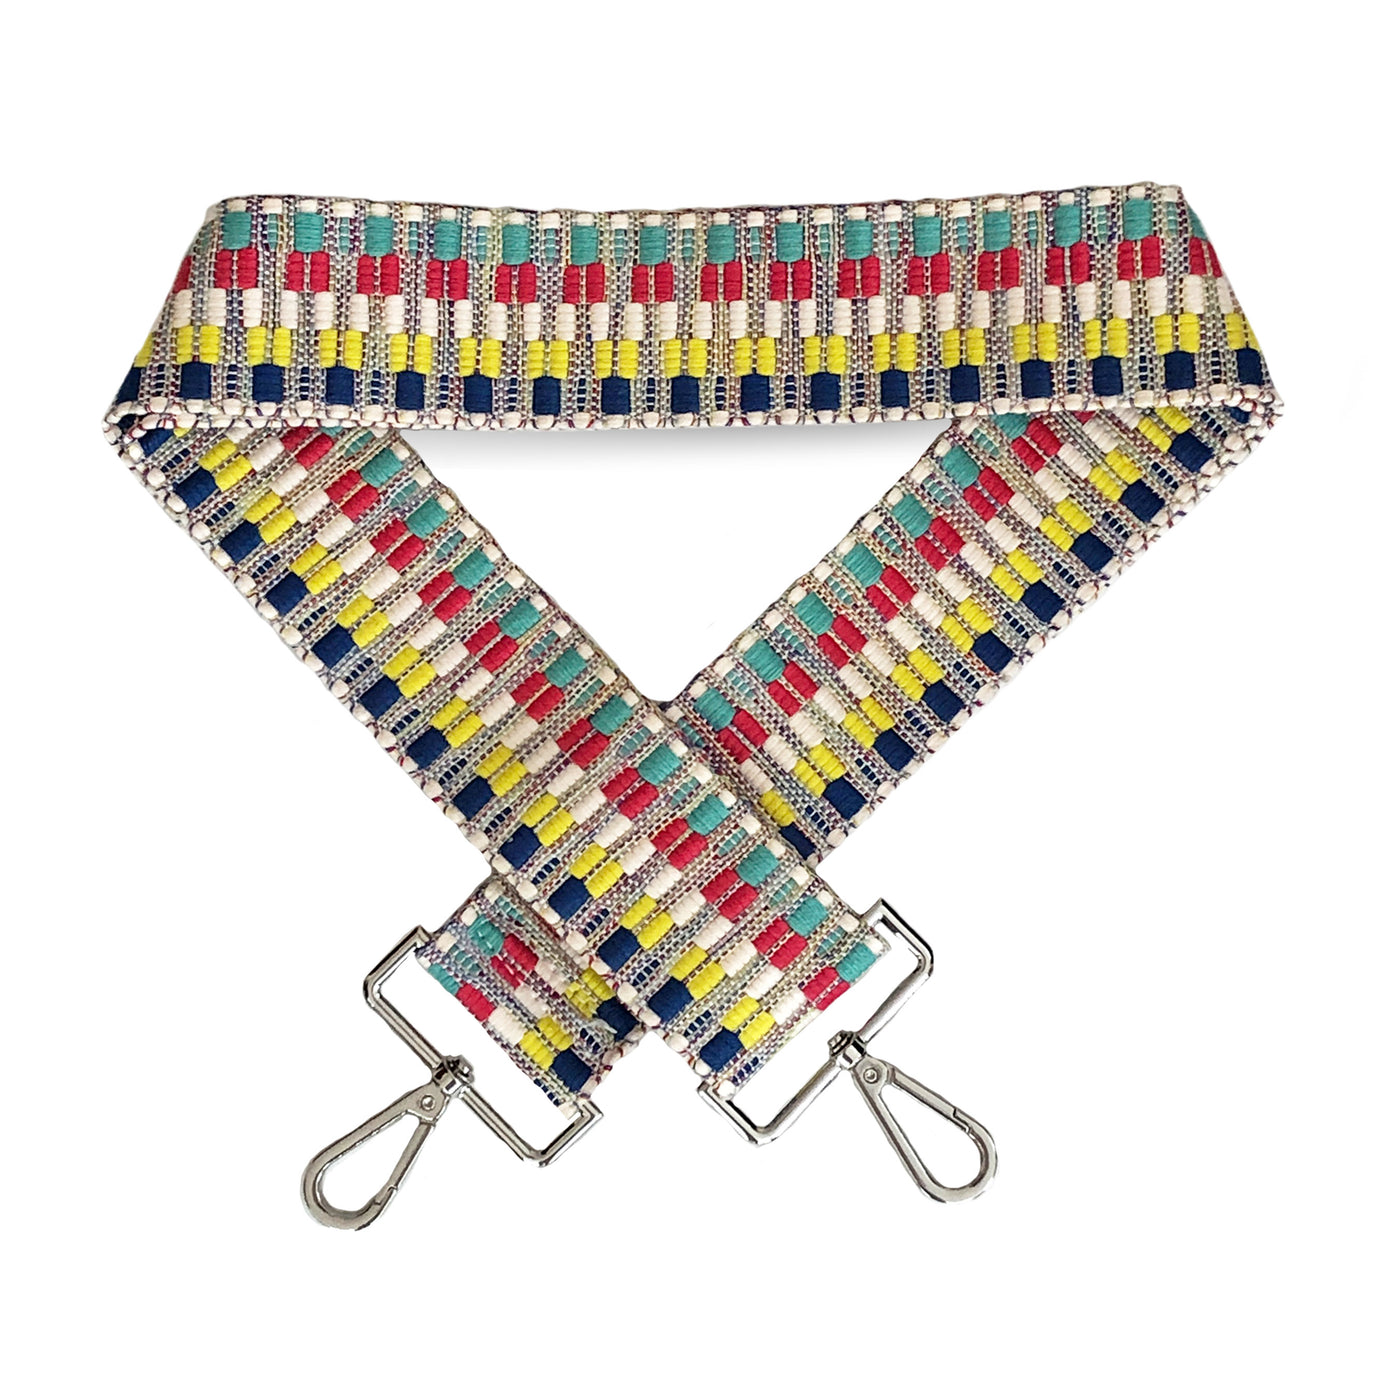 A colorful navy, white, red, yellow and teal patterned woven bag strap with silver metal buckles, shown laying on a plain white background. 